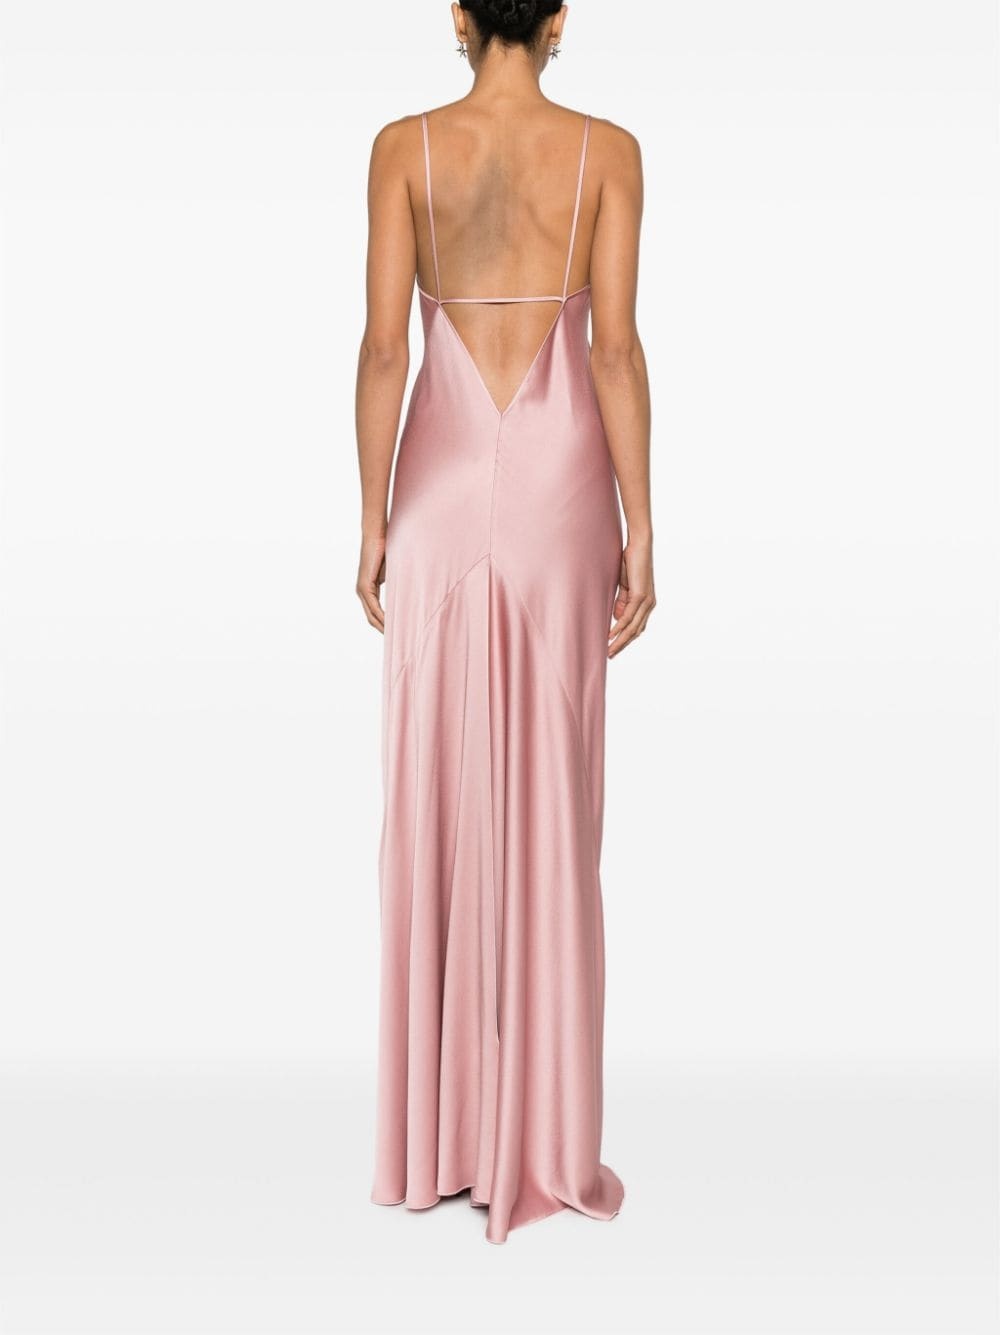 Cami open-back satin gown - 4